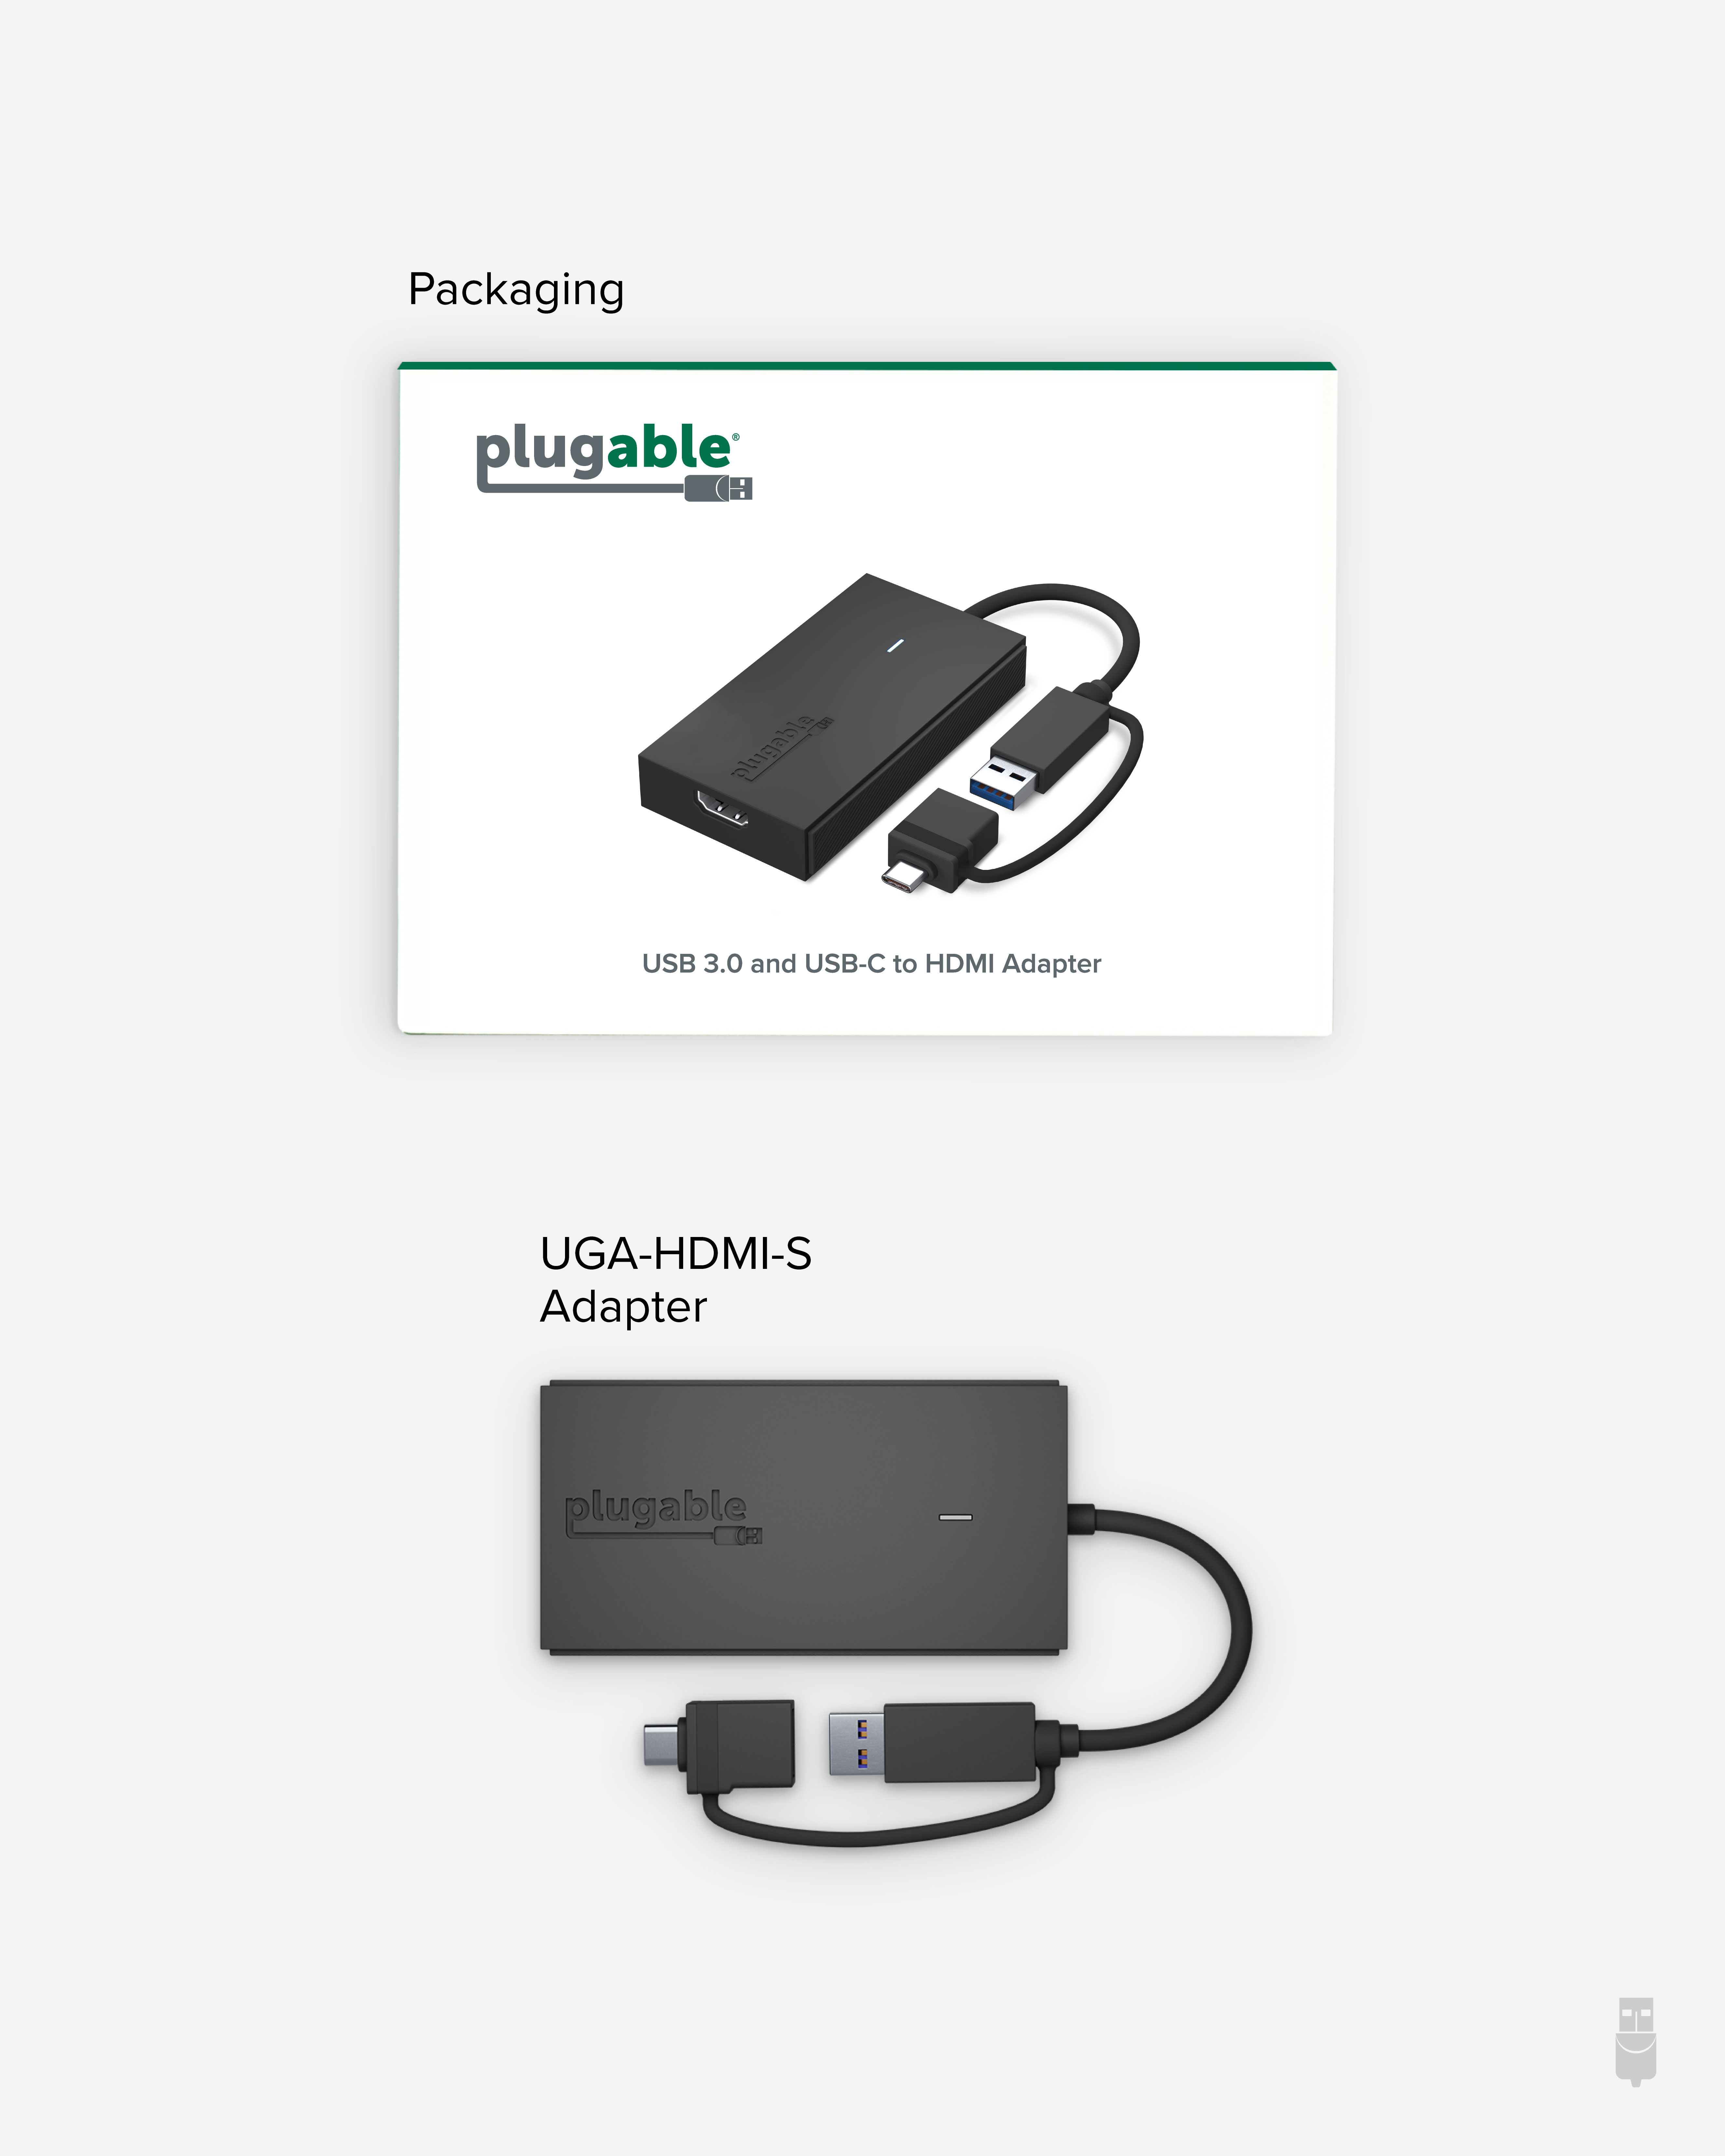 Plugable USB C to HDMI Adapter, Universal Video Graphics Adapter for USB 3.0 and USB-C Macs and Windows, Extend an HDMI Monitor up to 1080p@60Hz - image 2 of 7